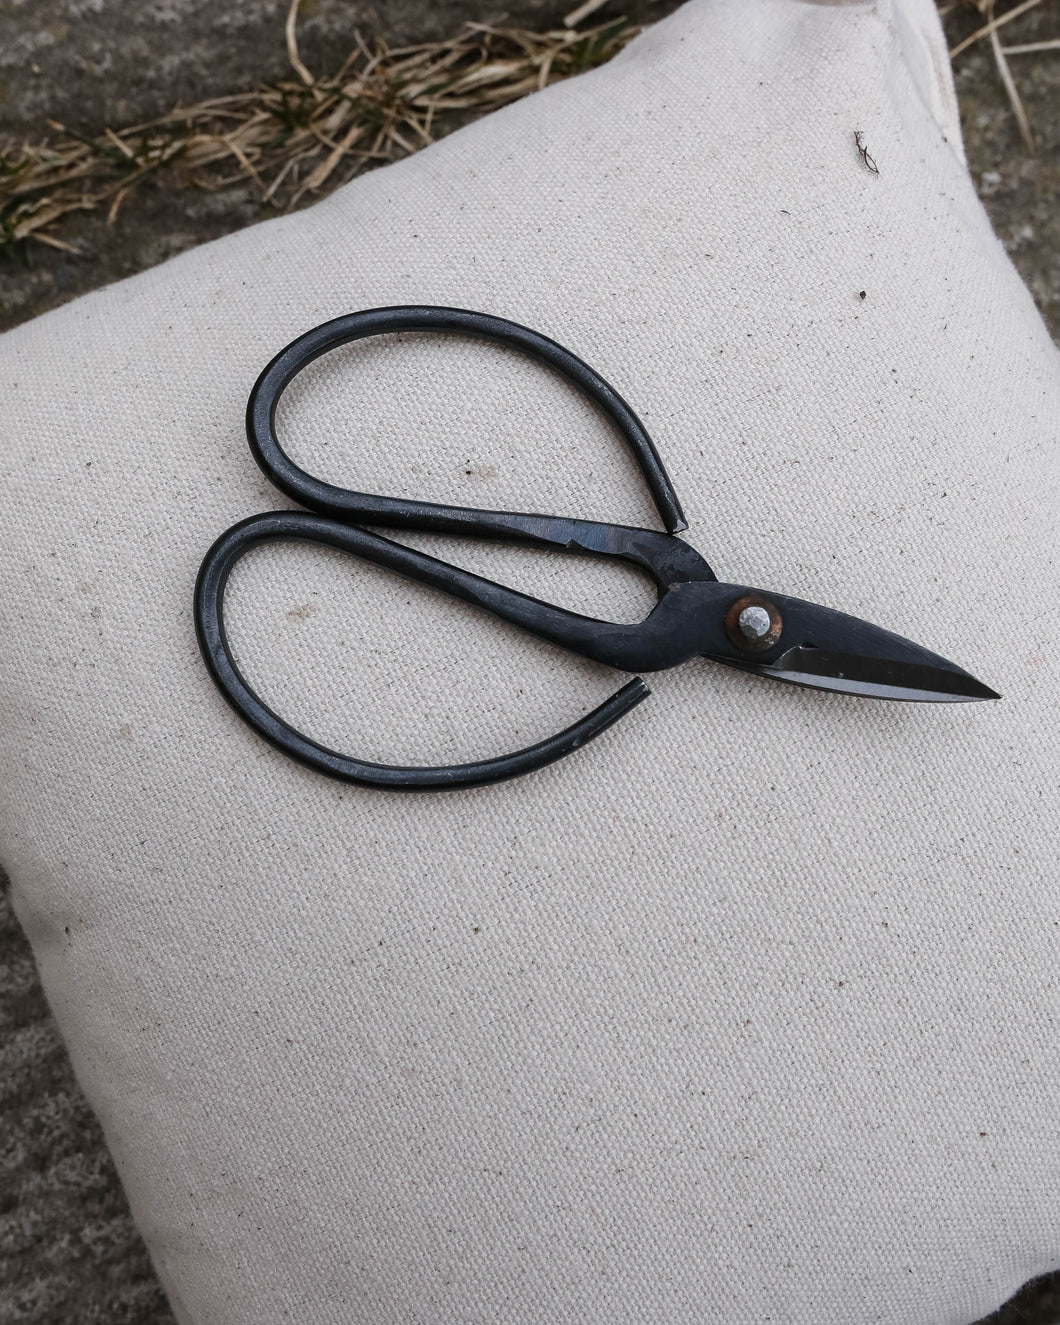 Forged Iron Utility Shears - Sm - Natural